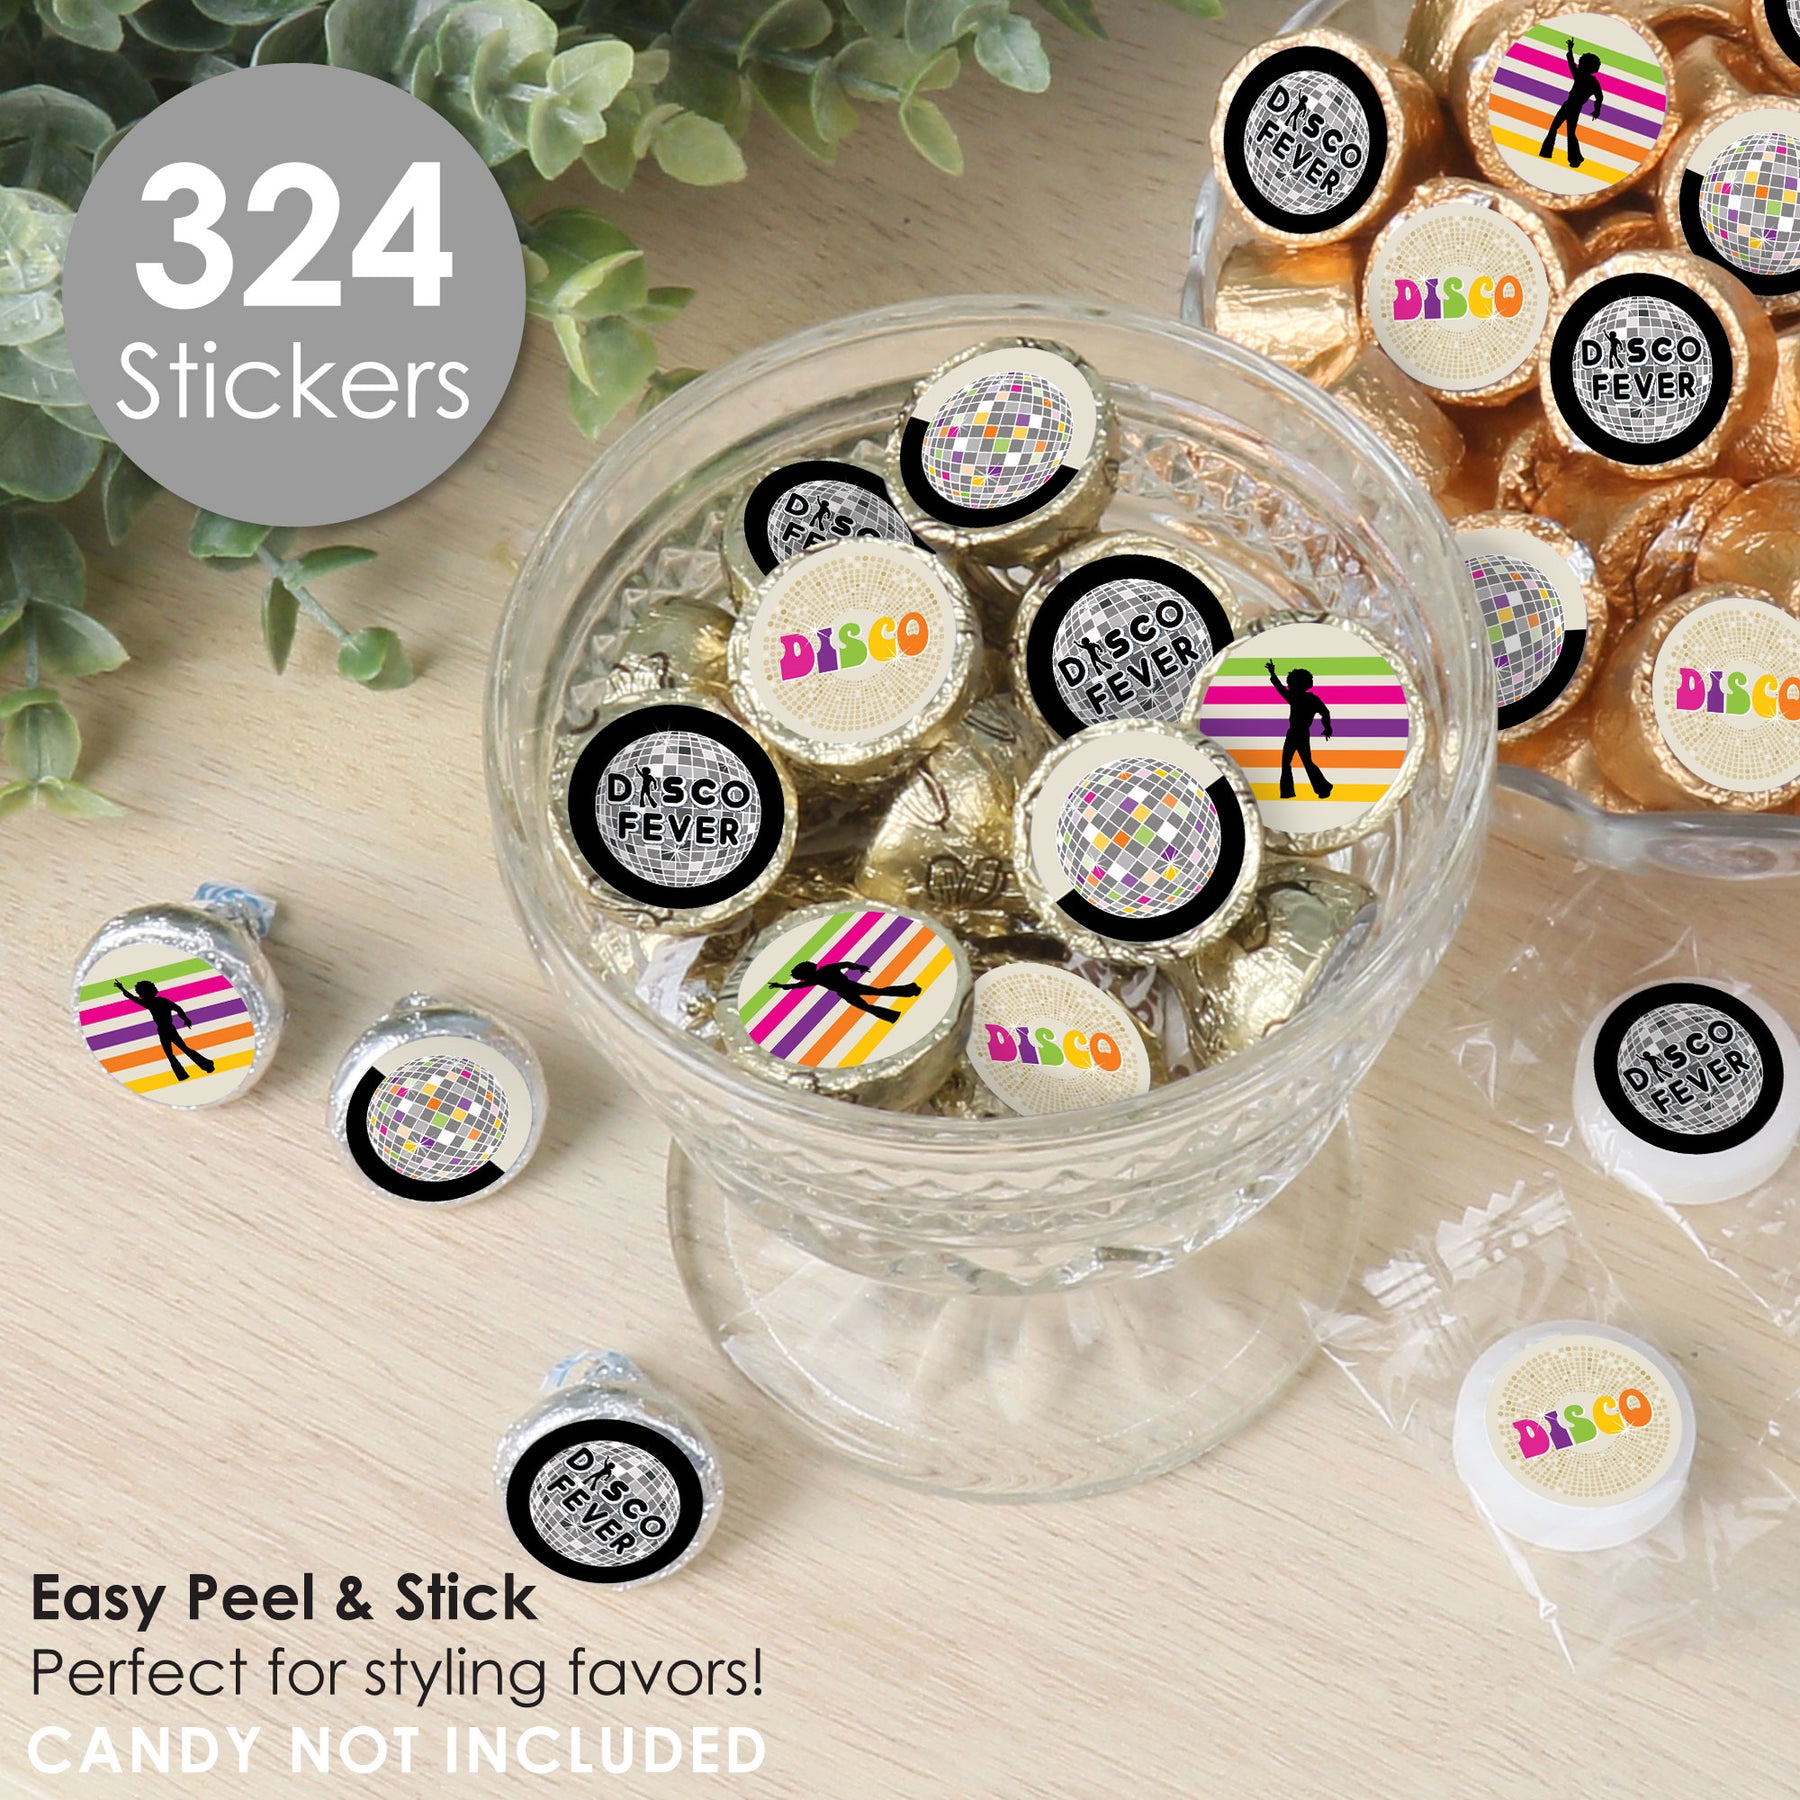 70's Disco - 1970s Disco Fever Party Small Round Candy Stickers